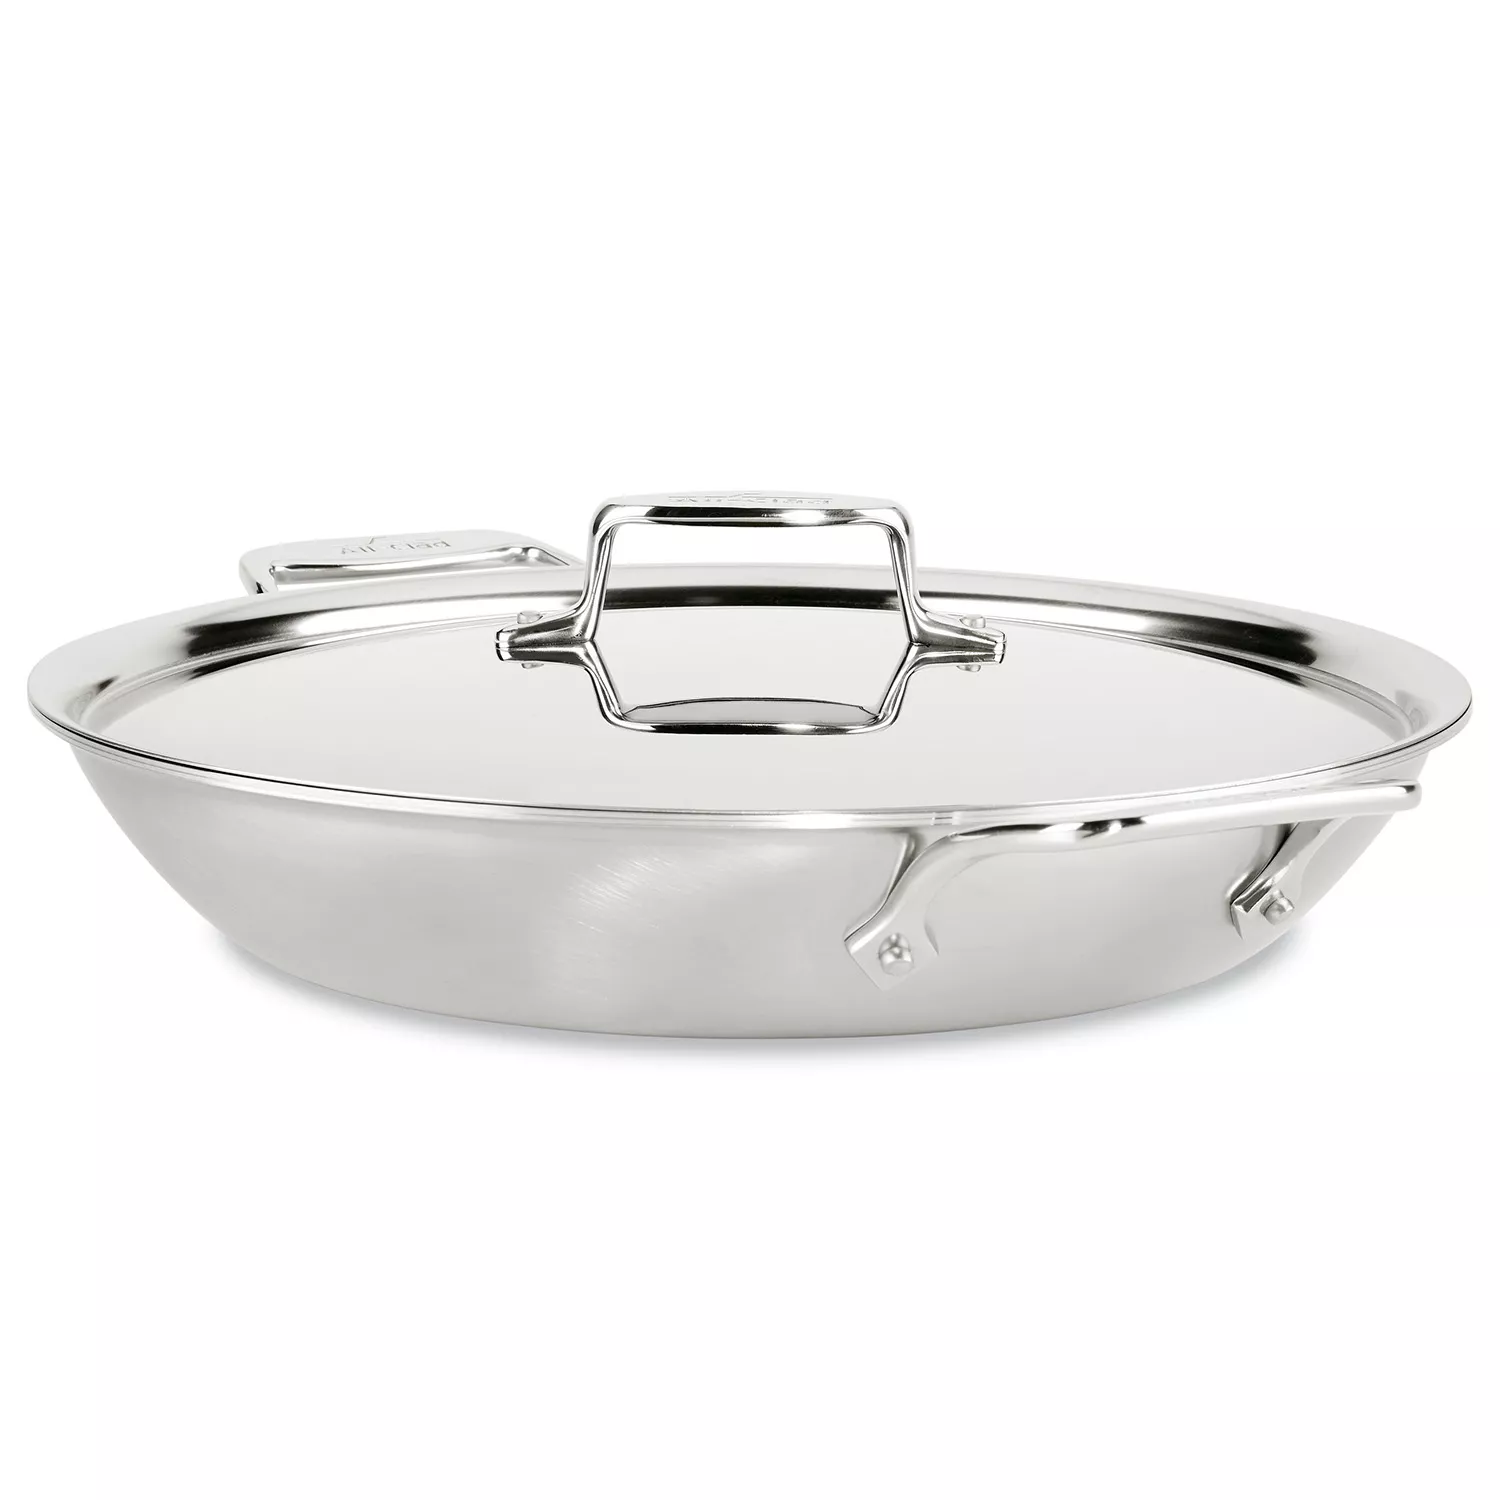 All-Clad D5 5 Quarts Stainless Steel Round Dutch Oven & Reviews